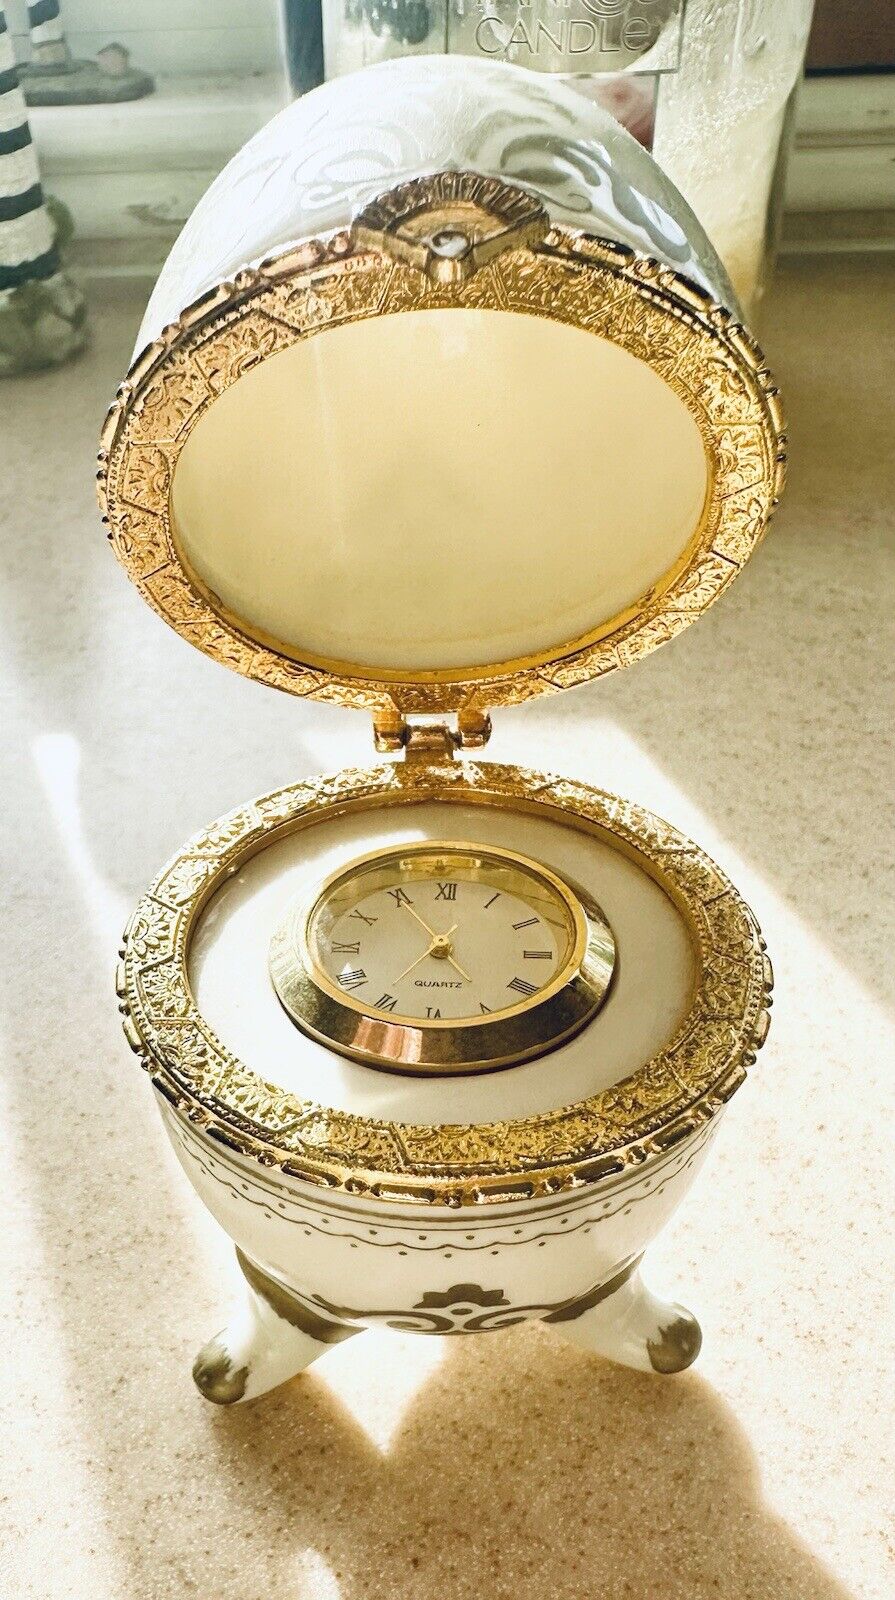 Porcelain Quartz Clock Egg Hinged 3-Footed White With Gold Trim- Stunning